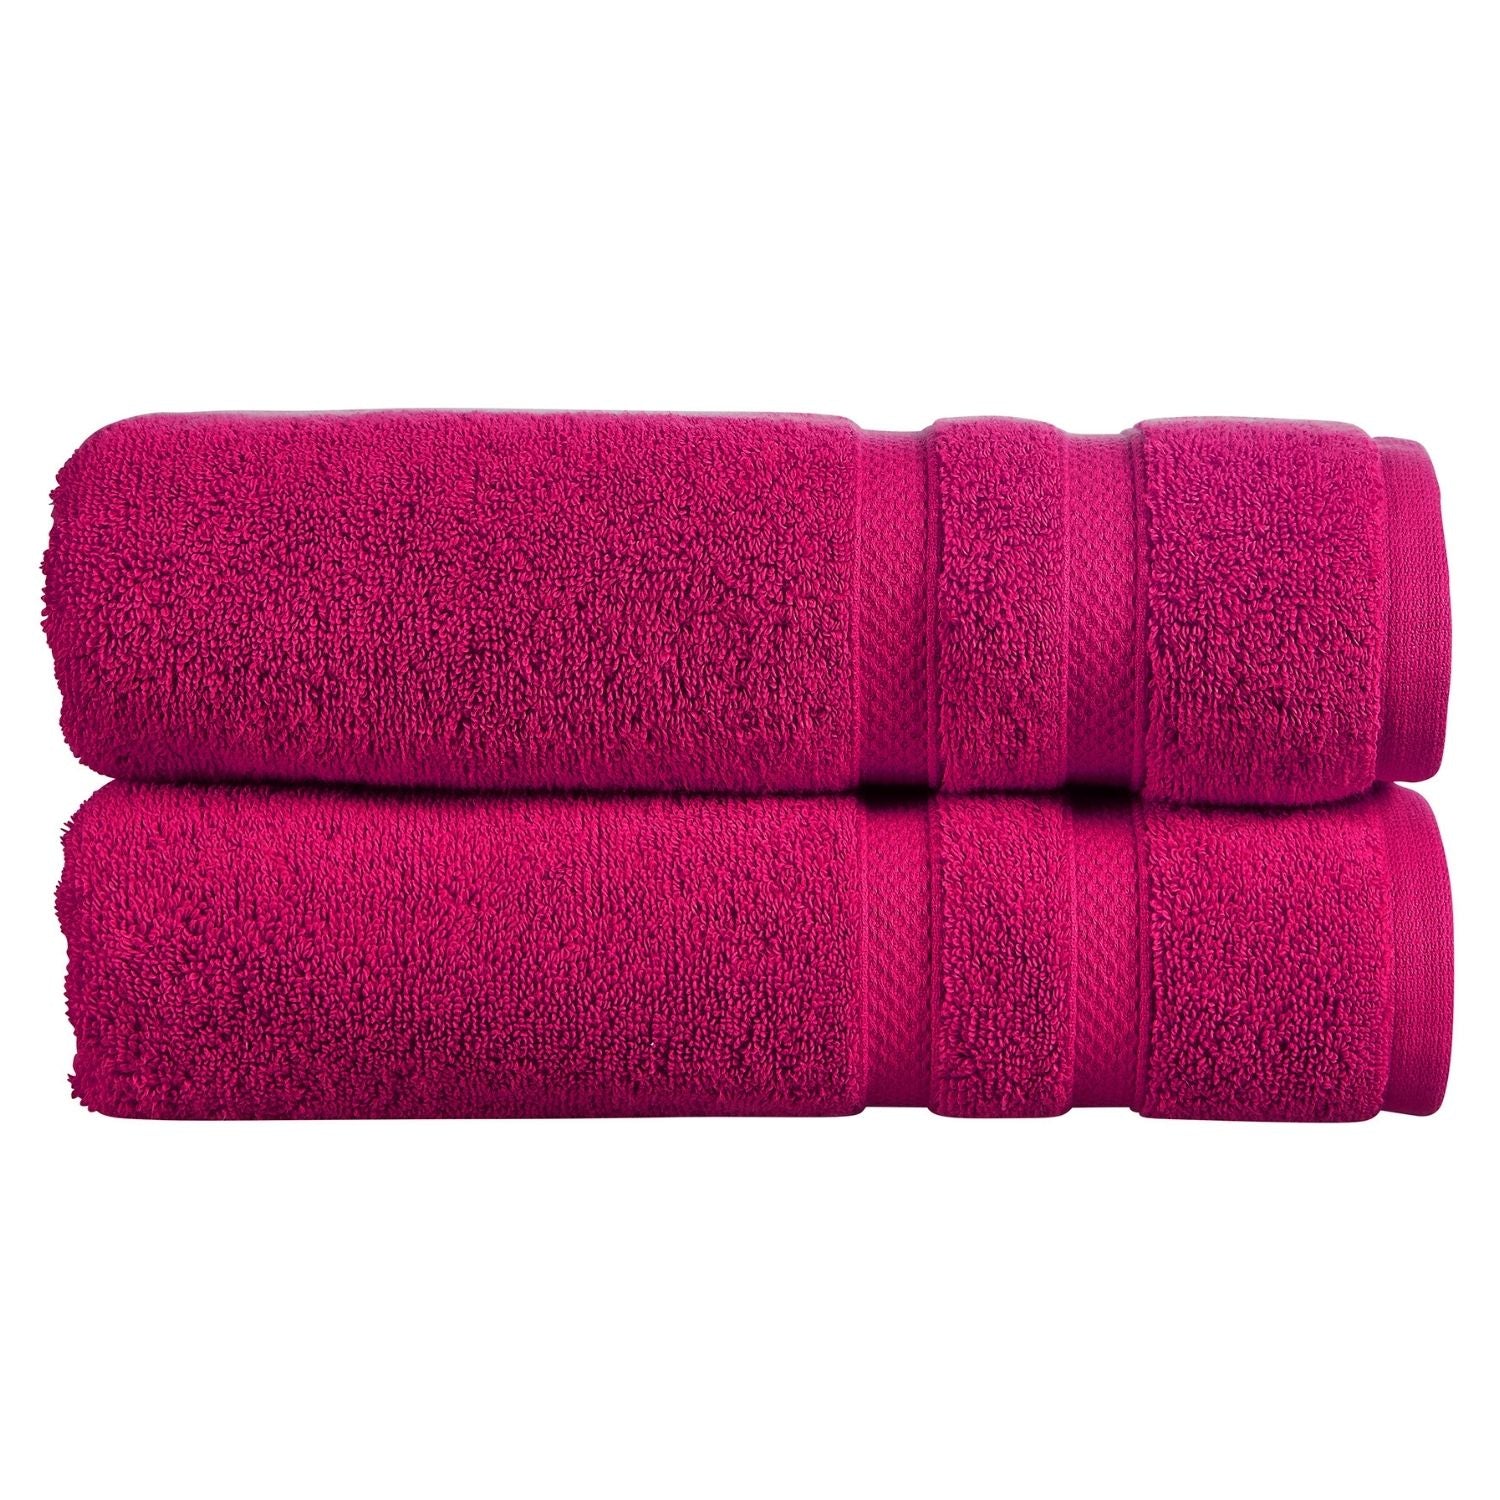 Christy Chroma Bath Towel - Orchid 1 Shaws Department Stores